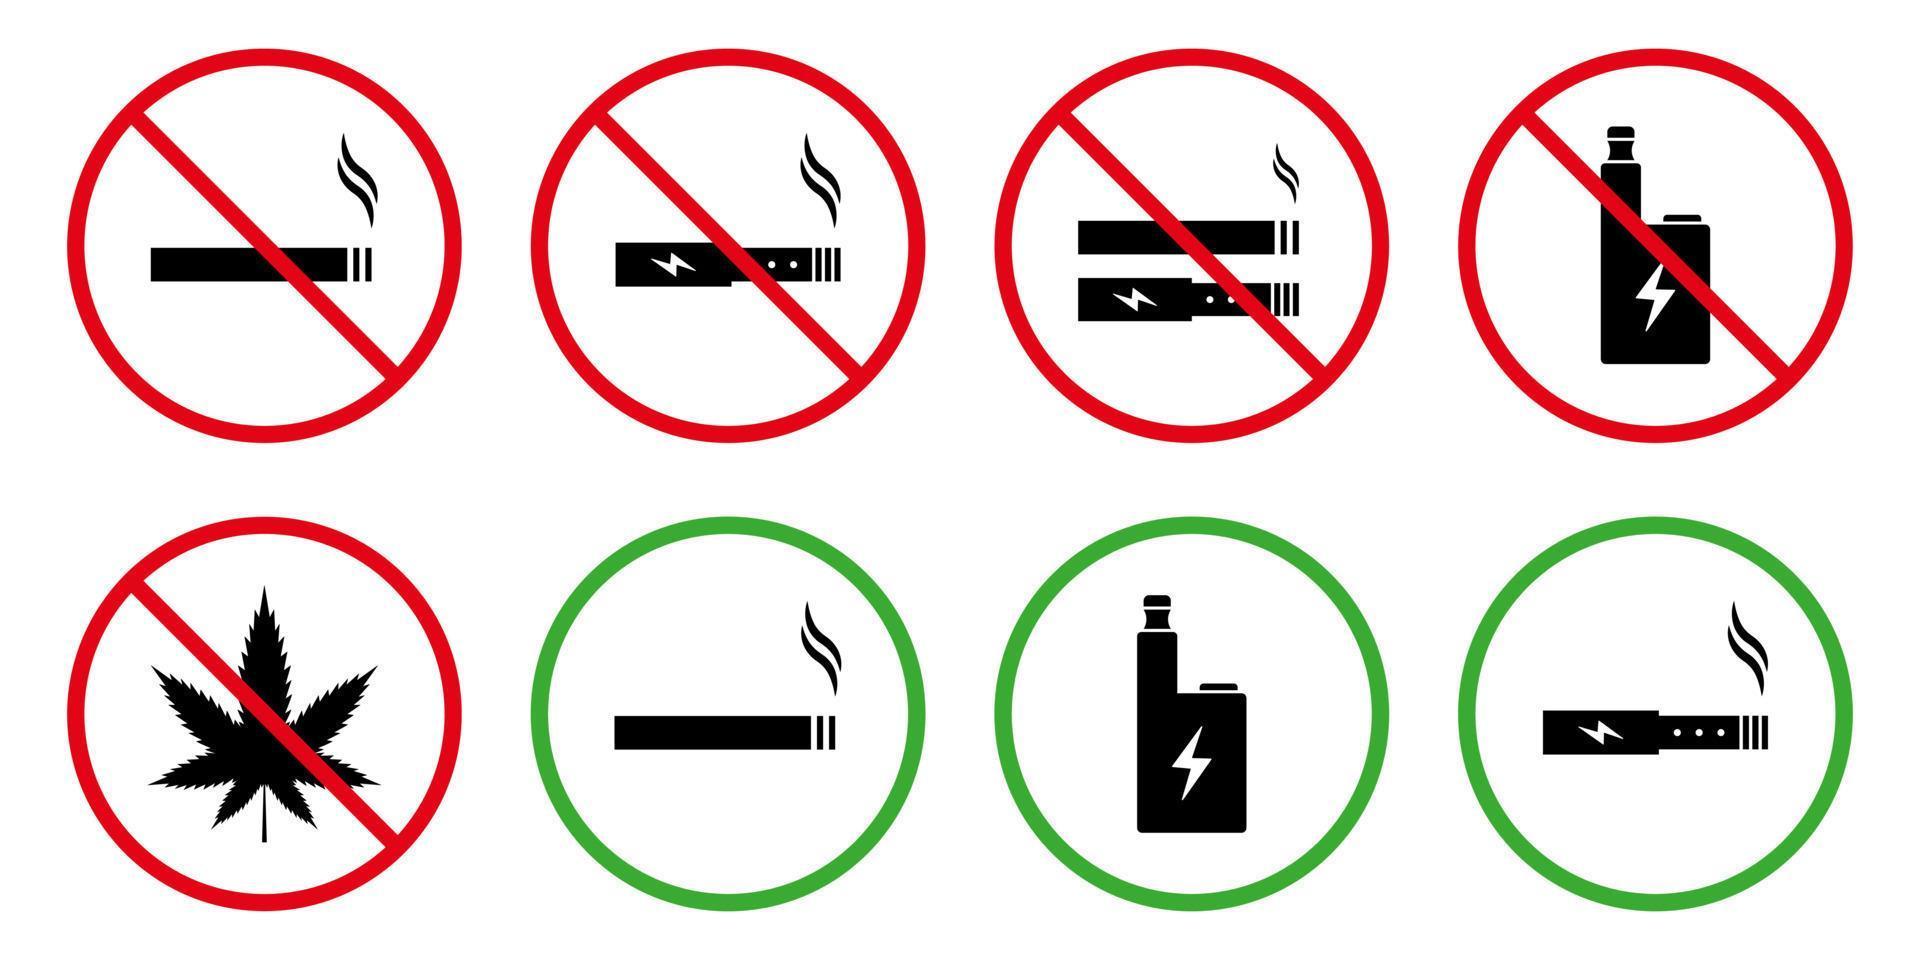 Forbidden Smoke Area Sign Set. Ban Zone Smoke Cannabis Drug Vaping Electronic Cigarette Silhouette Icon. Stop Smoke Area Prohibited Pictogram. Allow Smoking Green Sign. Isolated Vector Illustration.